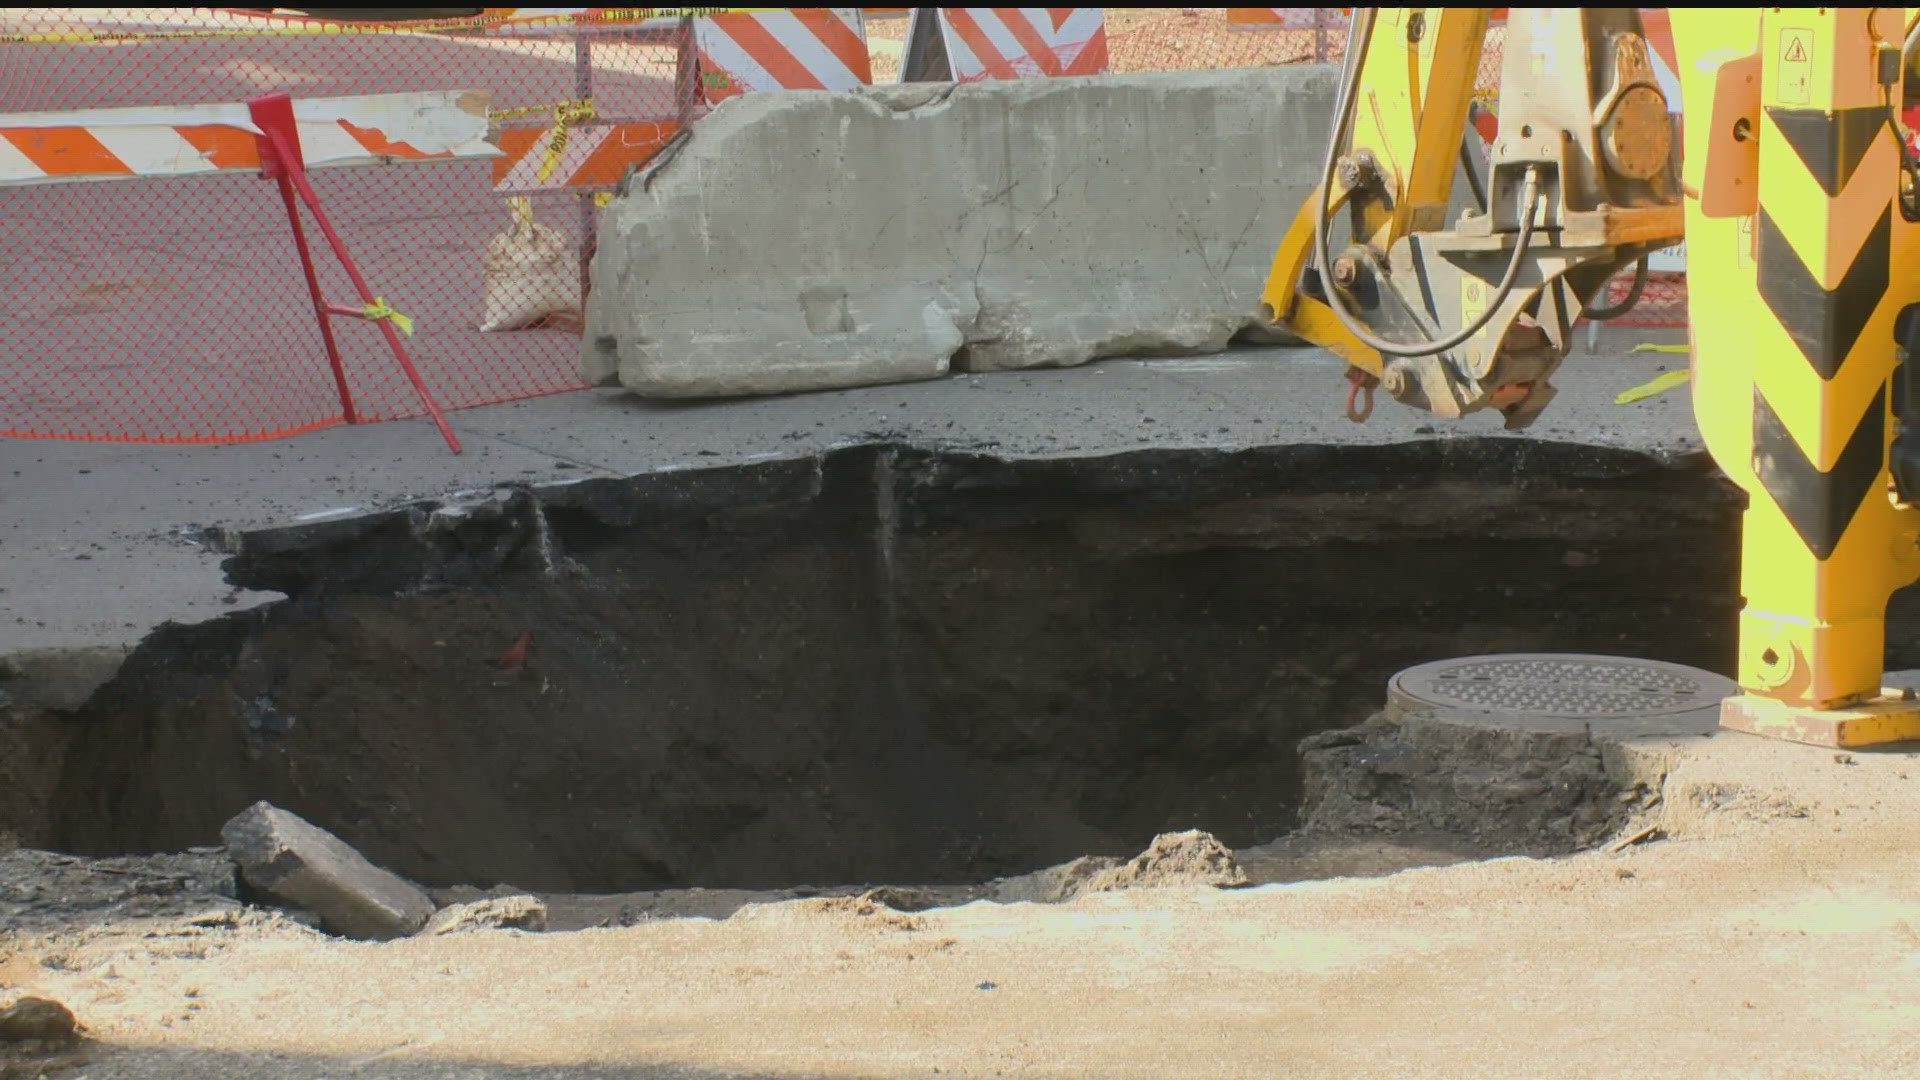 Officials said Monday the sinkhole was caused by a collapsed sewer main, adding that crews are planning to repair the sinkhole and intersection as soon as possible.